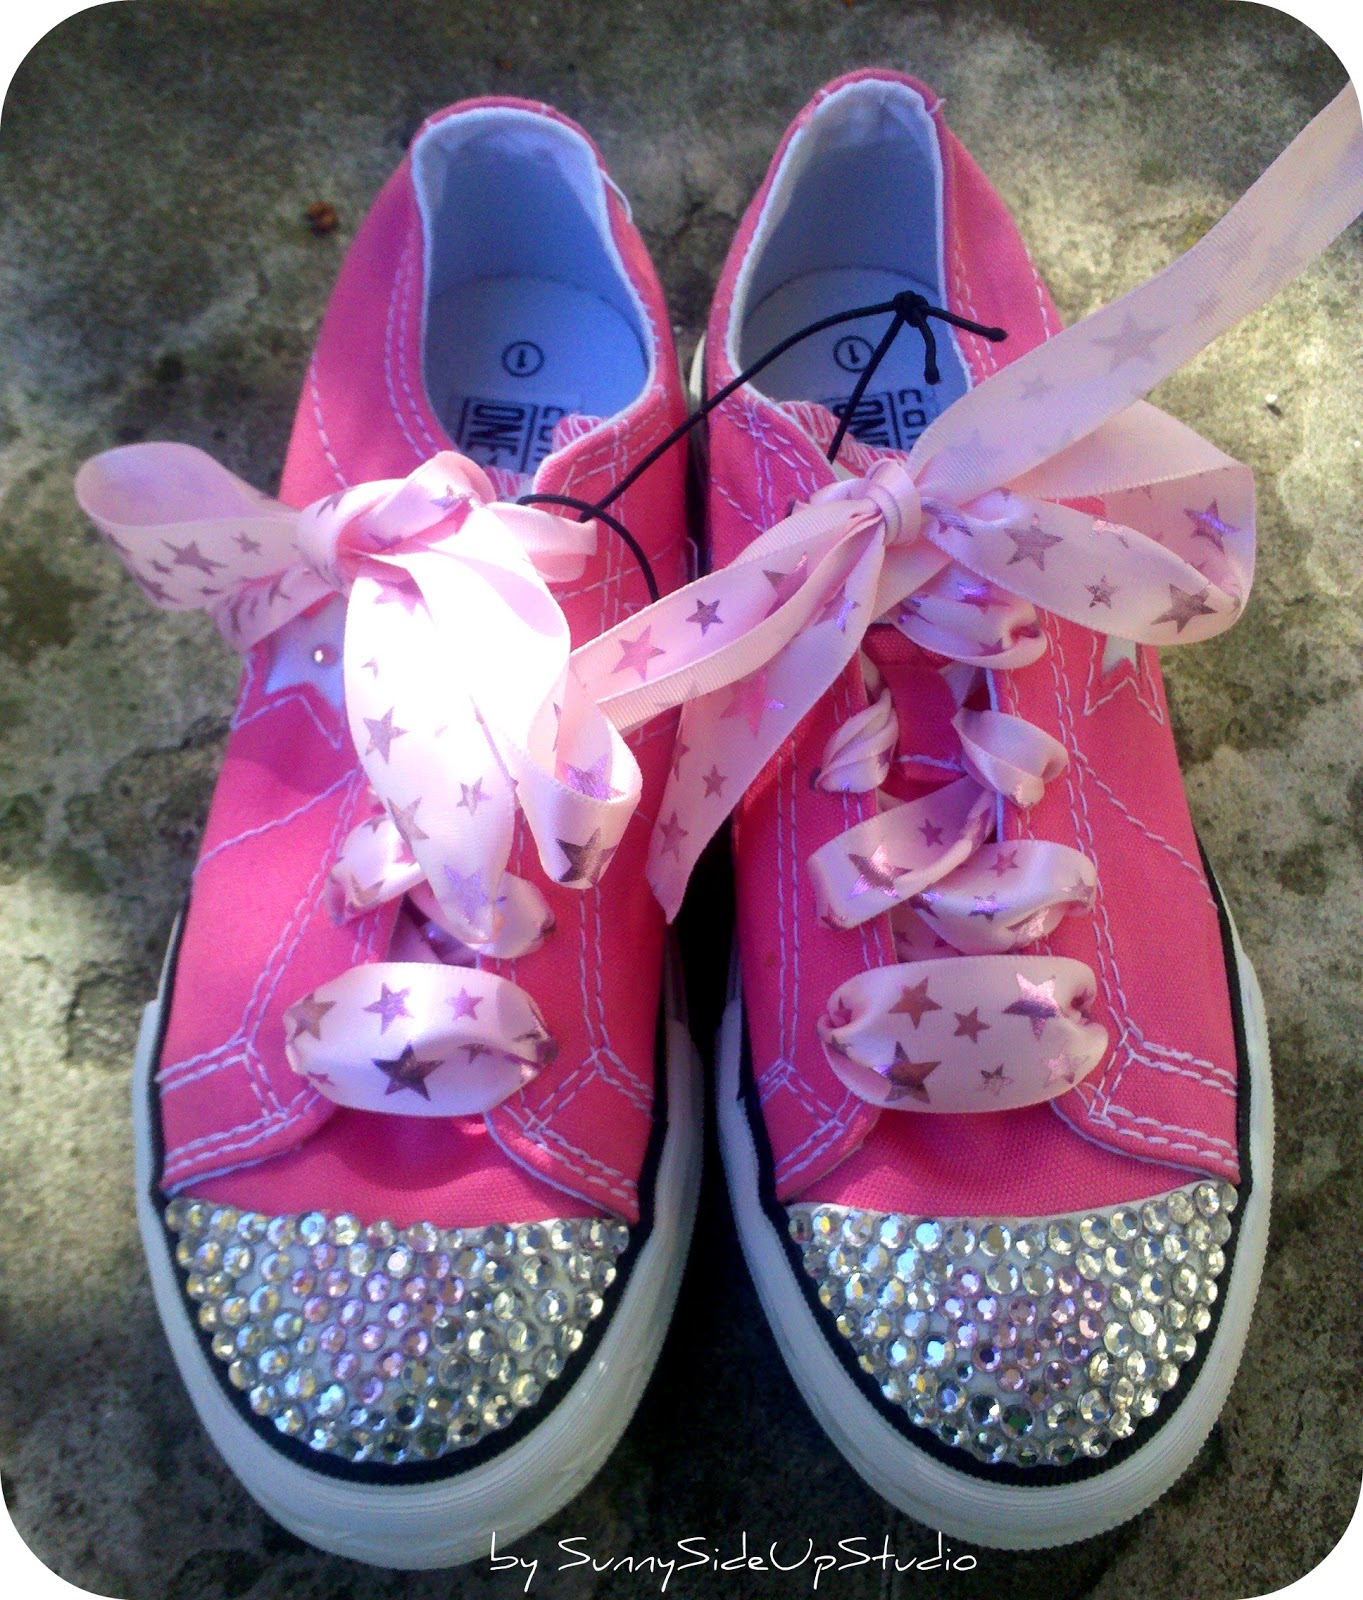 Creative Bubbles: Sing, Sing, I Made Shoes With Bling!